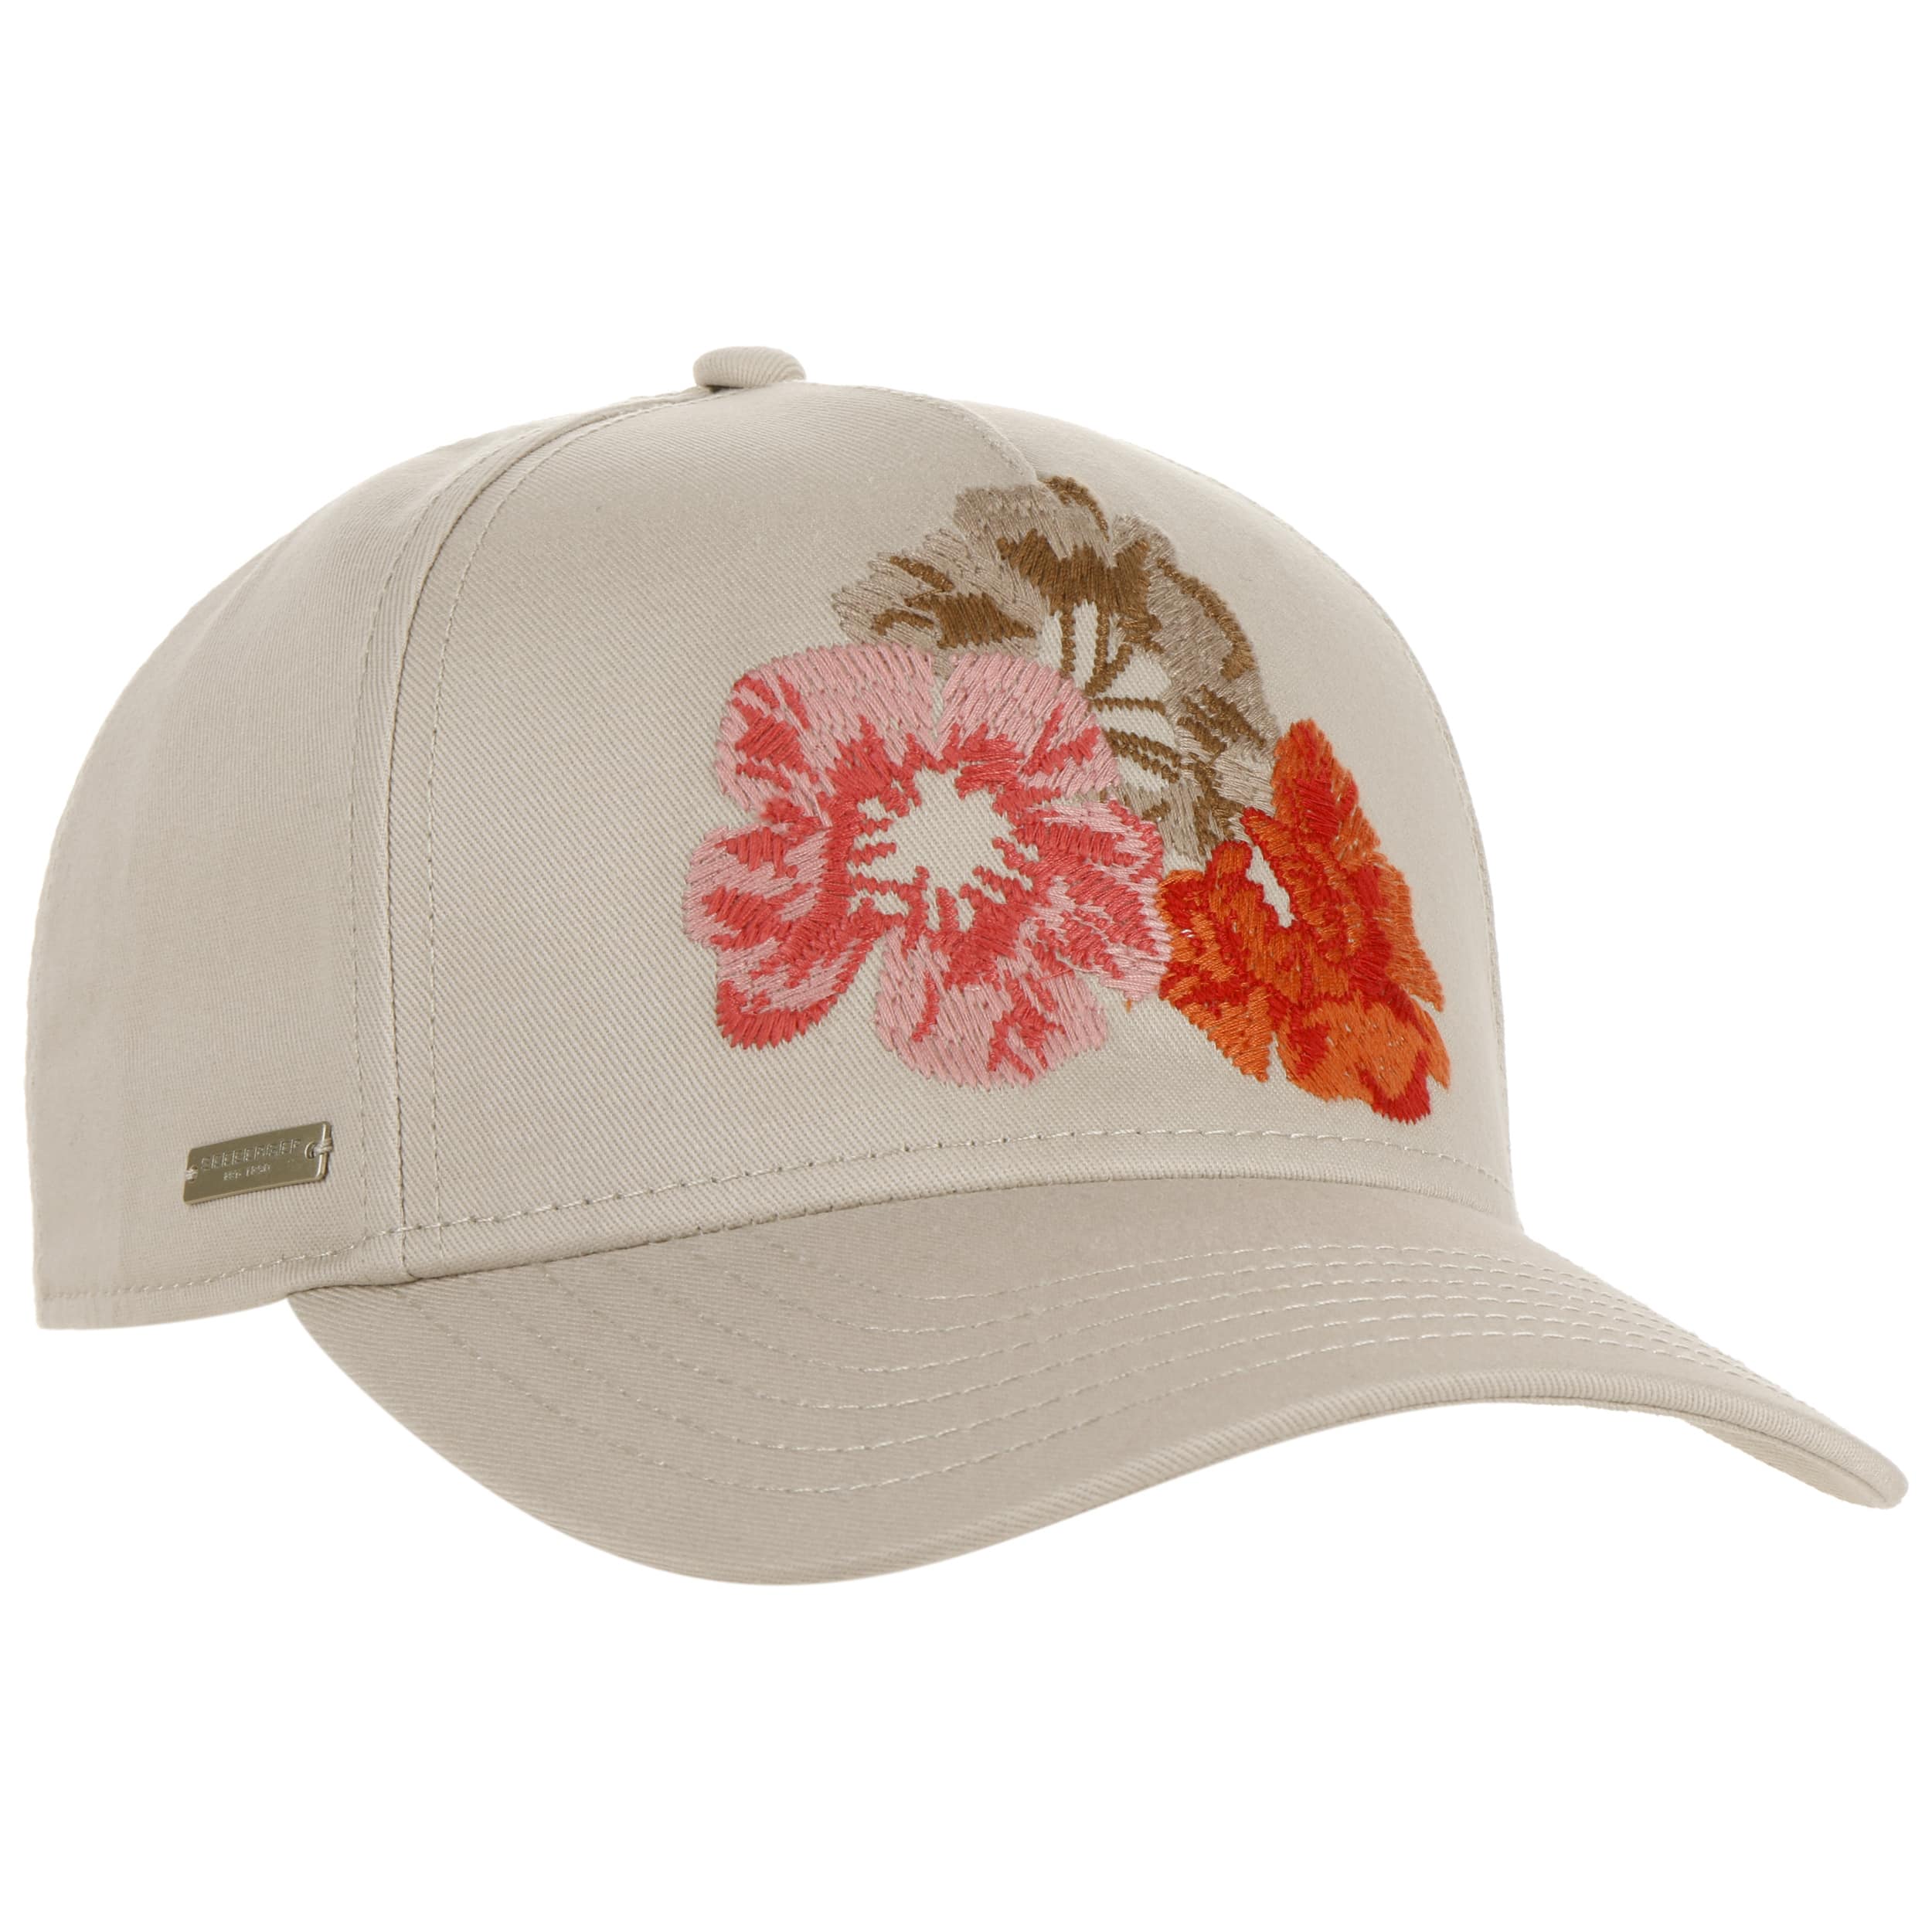 Stitched Flowers Cap by Seeberger - 29,95 €